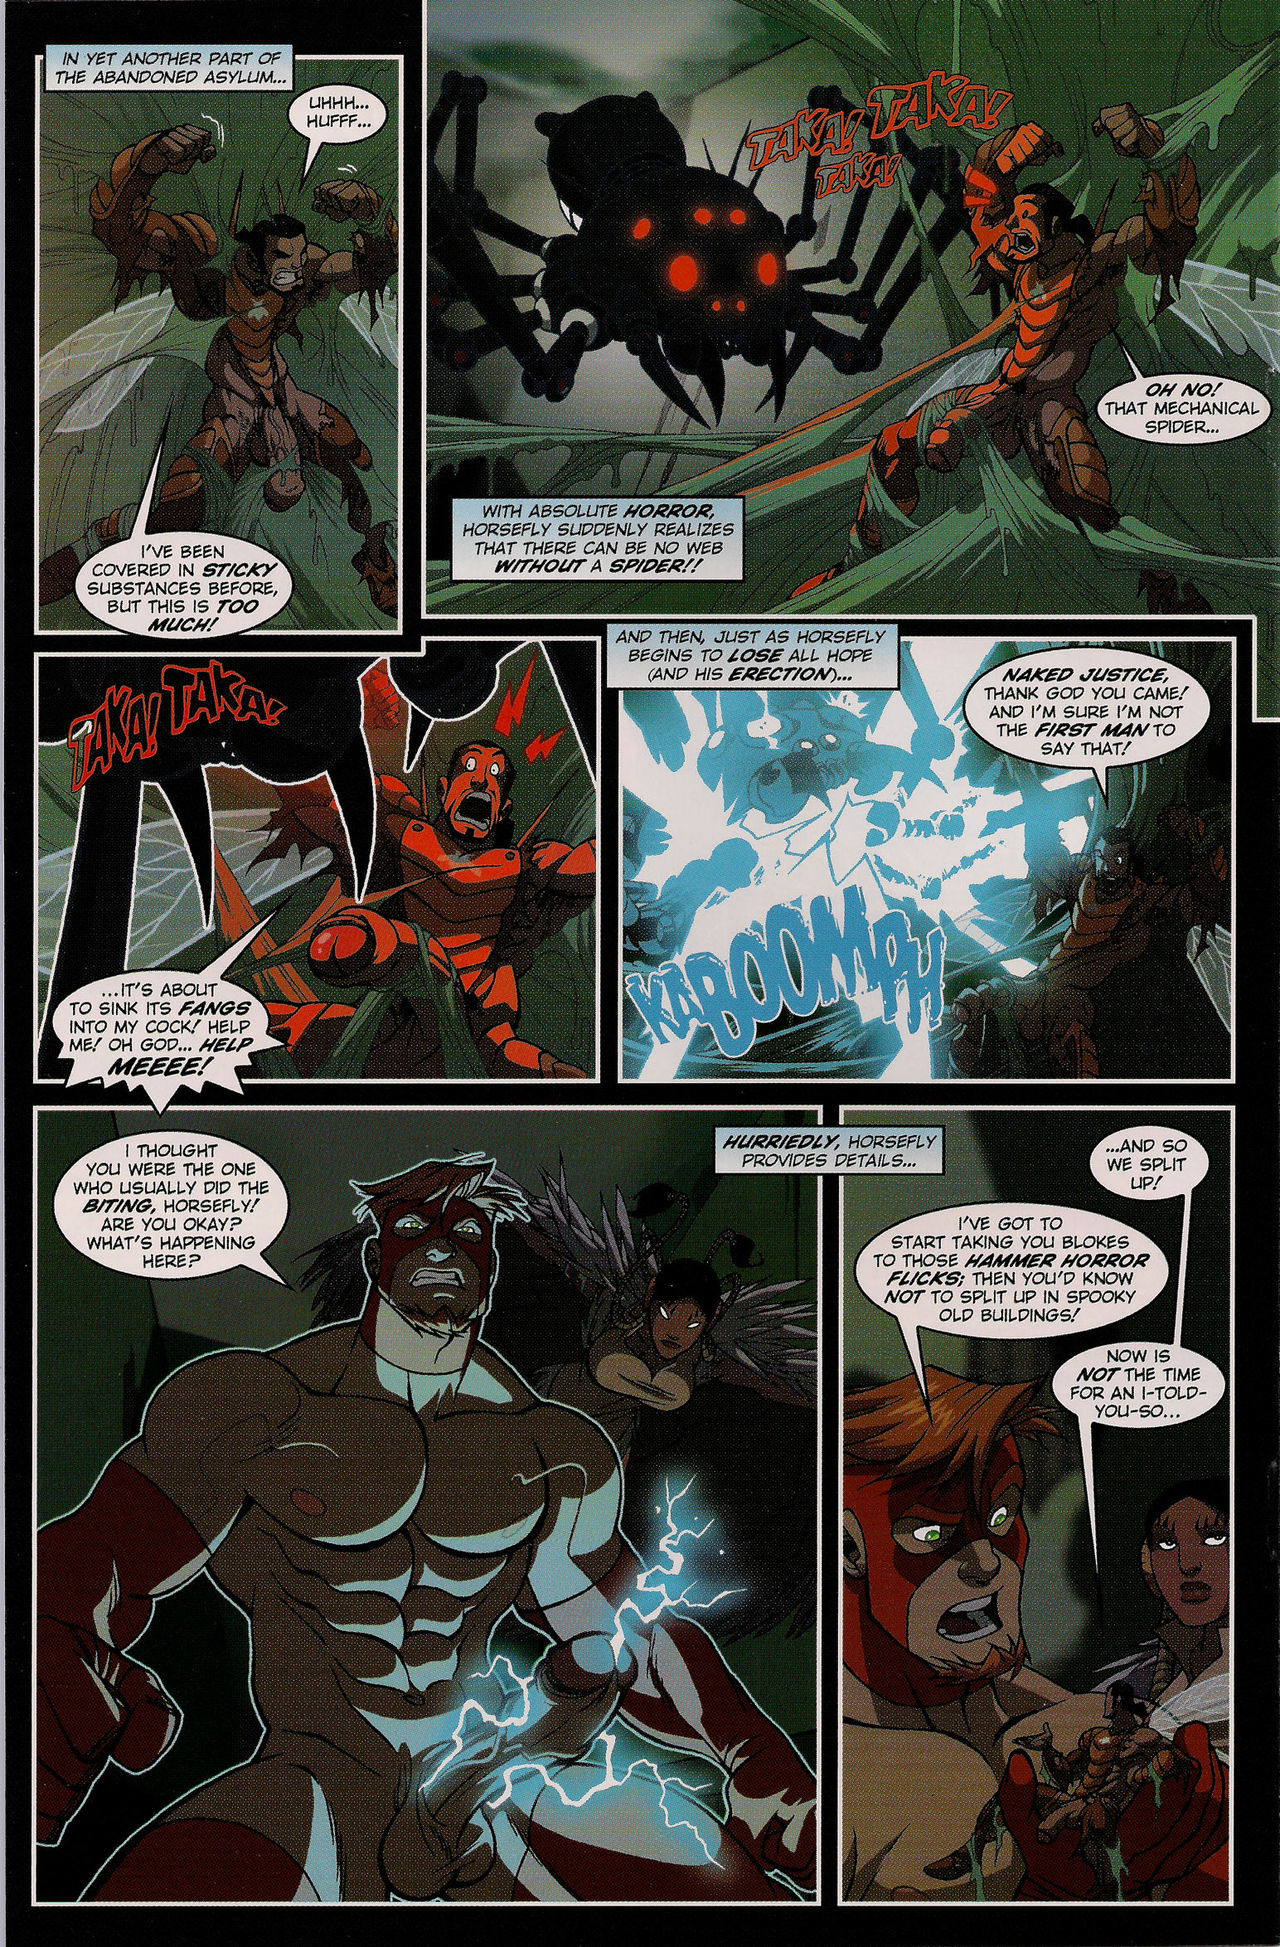 Naked Justice Beginnings 2 (Patrick Fillion) page 24